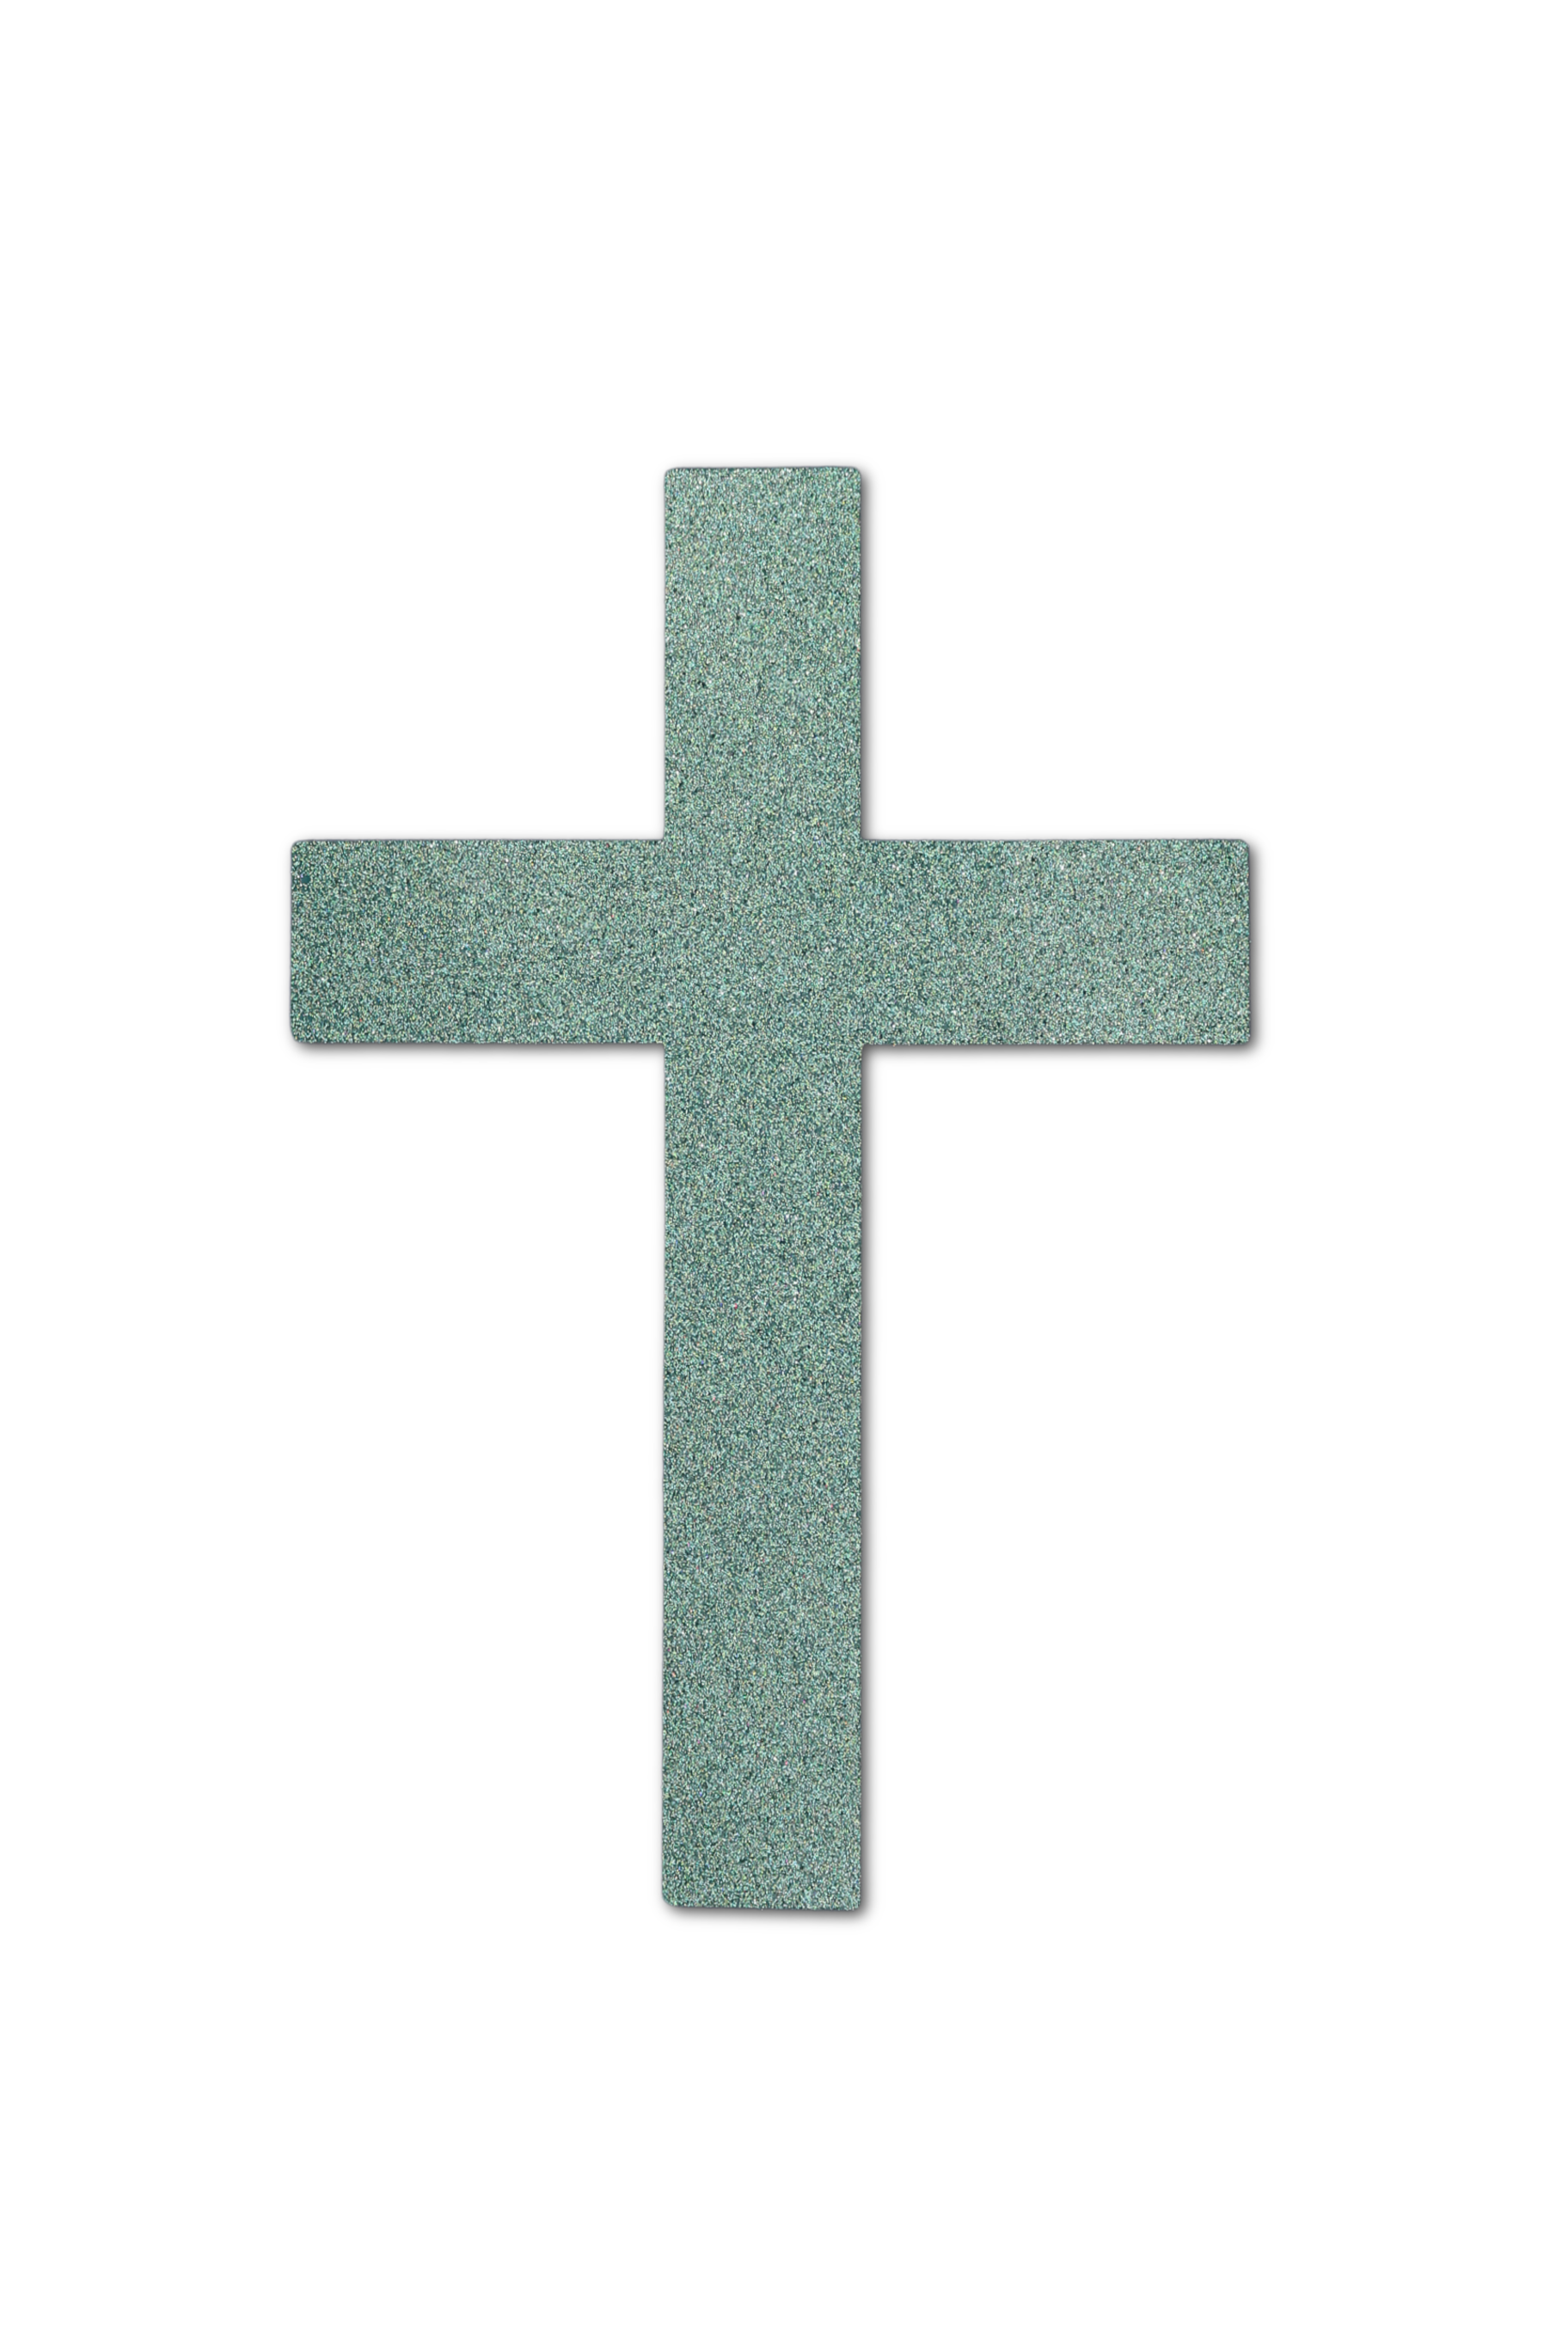 the bottom layer of a paper cross